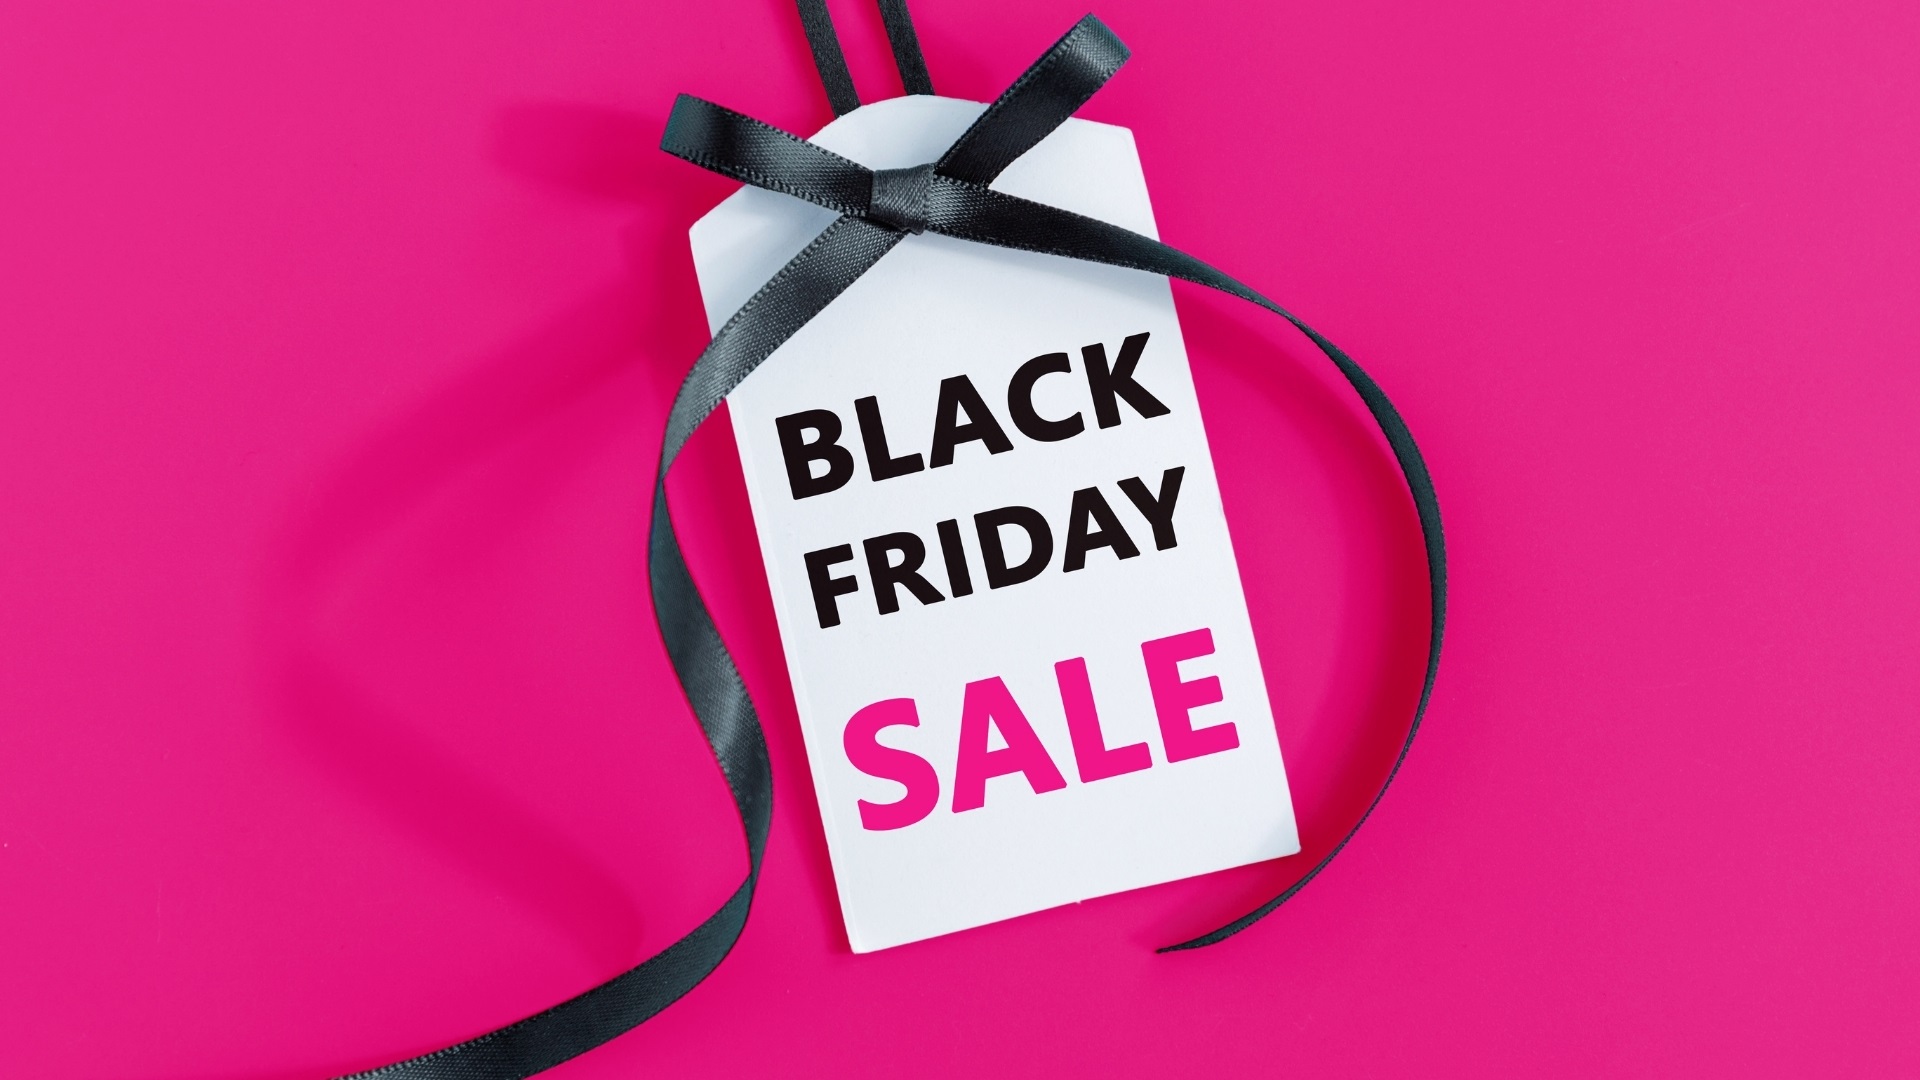 Black Friday Tips to help you avoid scams while shopping online - Newry headlines